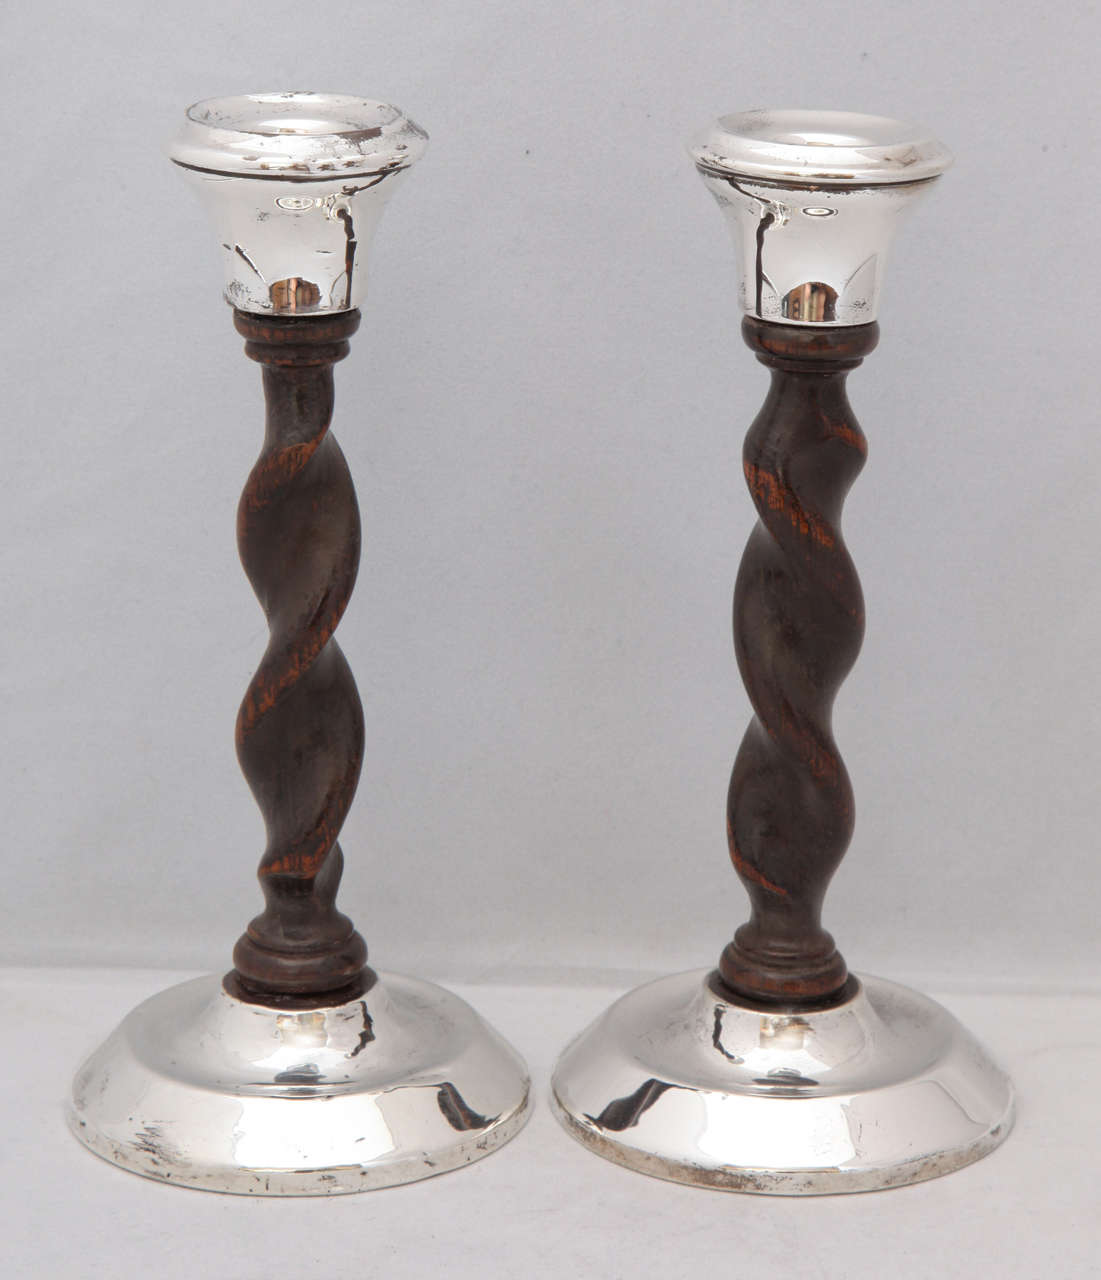 Art Deco, Jacobean-style, sterling silver and barley twist wood candlesticks by Joseph & Richard Griffin, Chester, England, 1925. Measures: 7 3/4